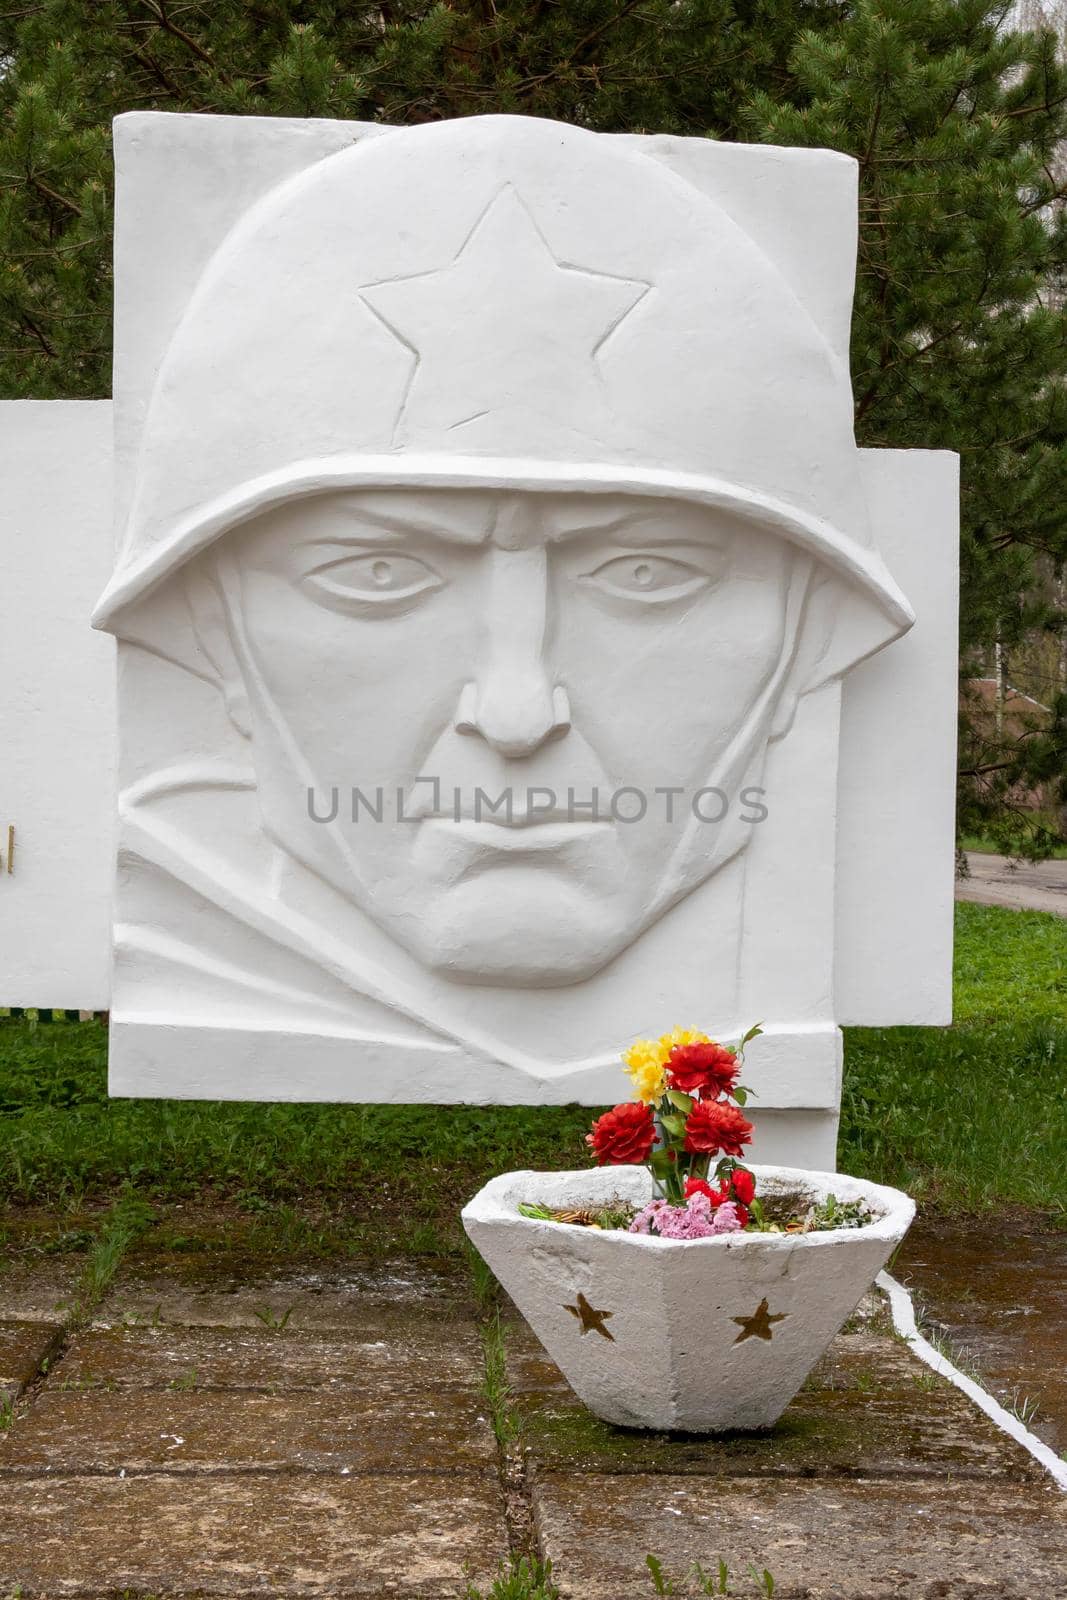 Sculpture of the head of a Soviet soldier.In the provincial Russian city of Rybinsk by lapushka62